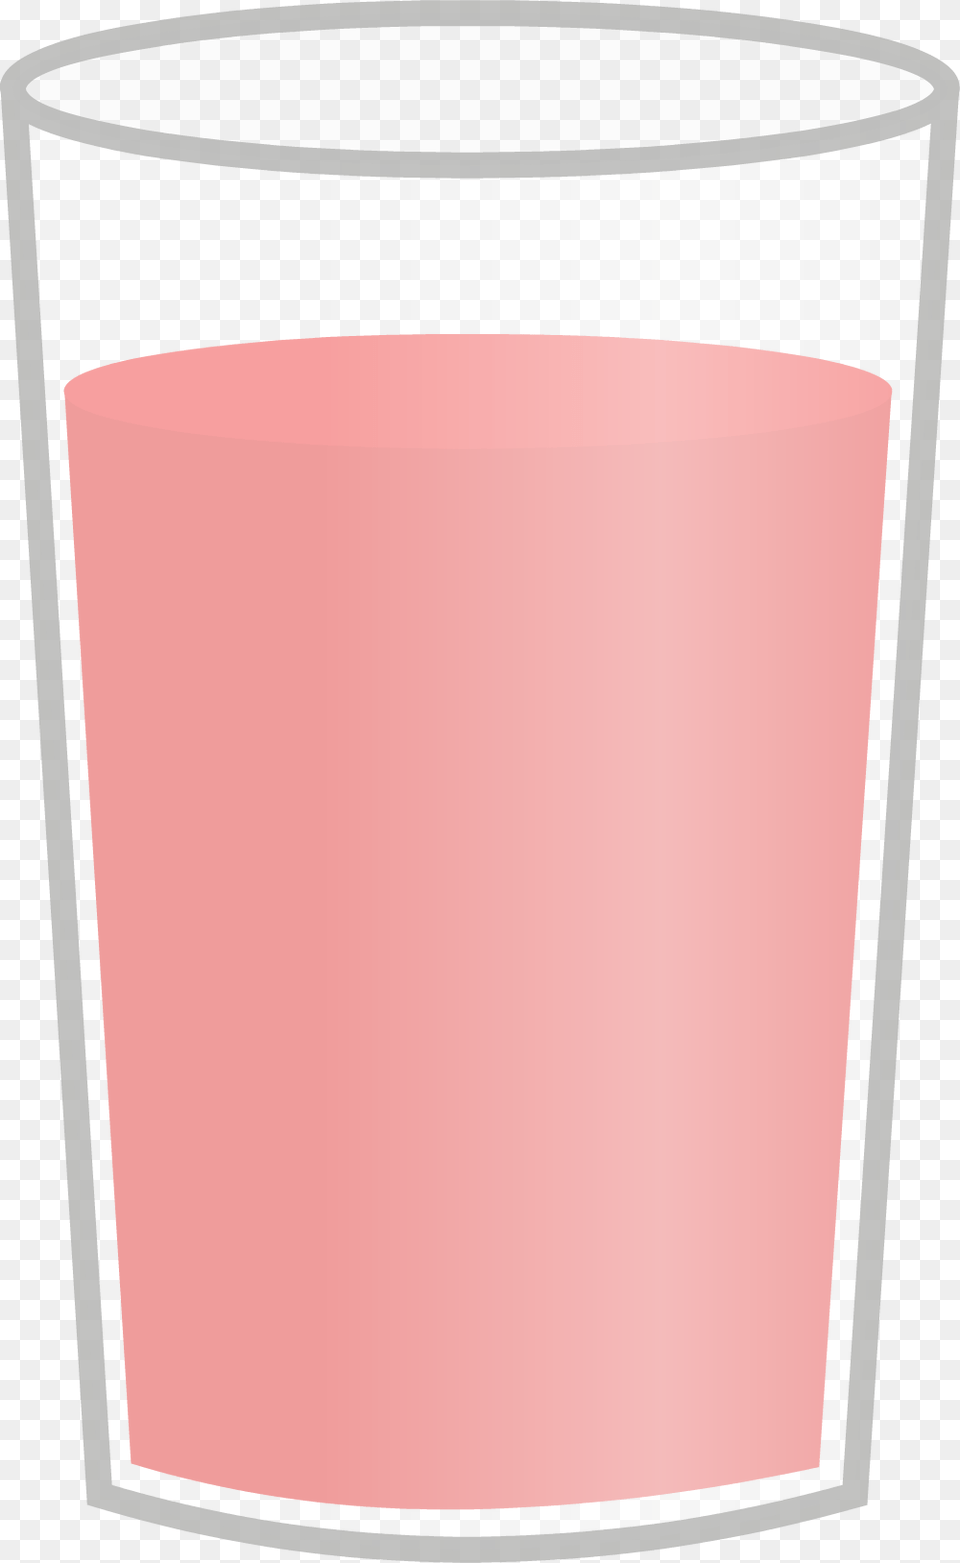 Fruit Punch Inanimate Objects Fruit Punch, Glass, Beverage, Juice, Milk Png Image